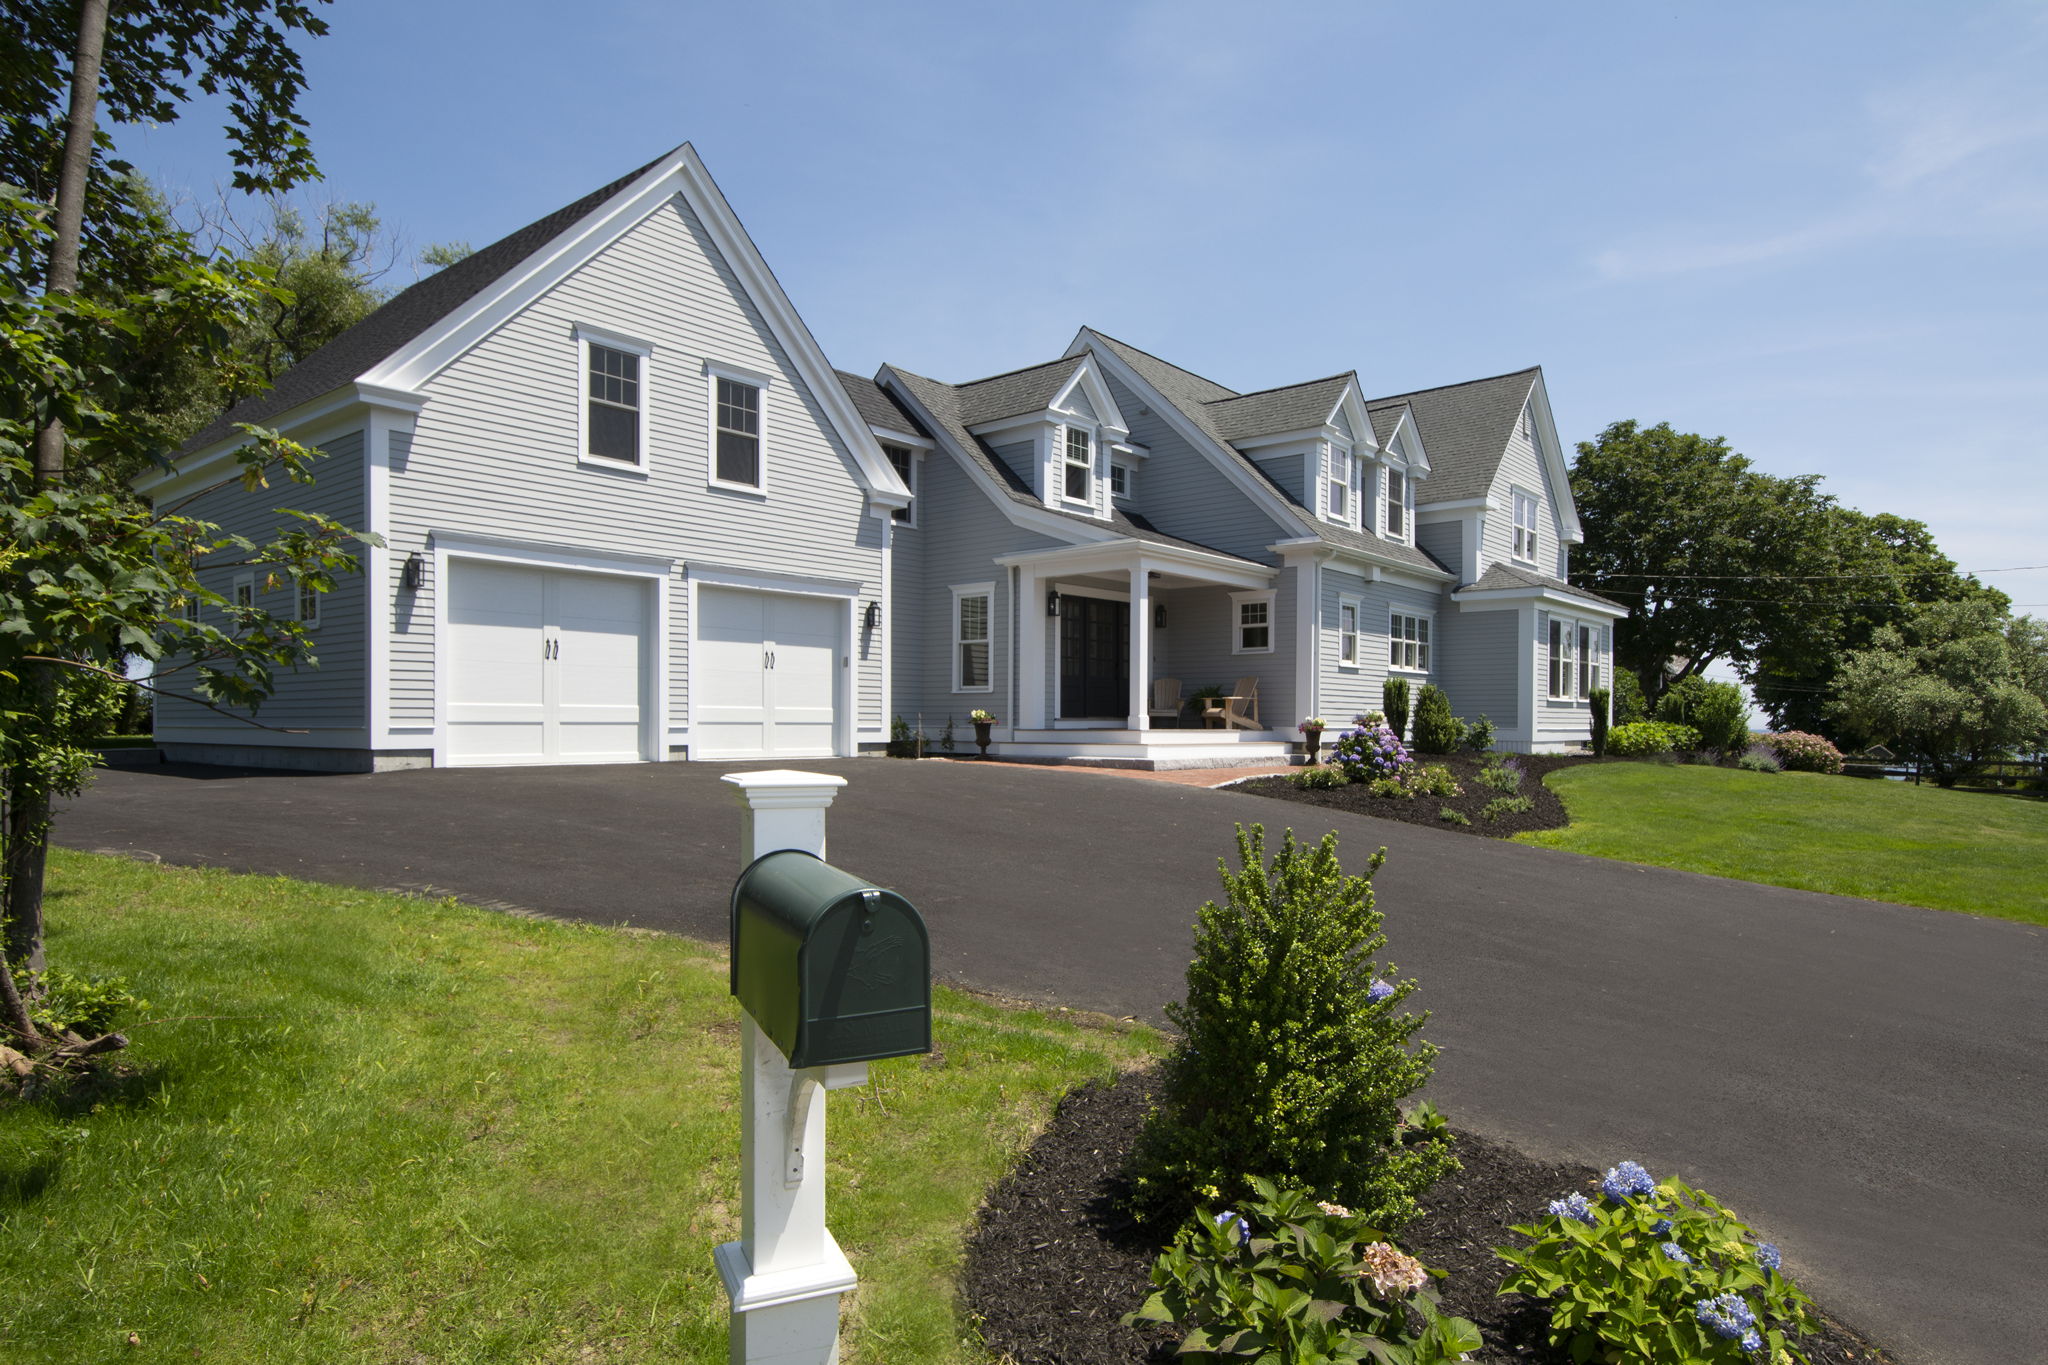  160 Edward Foster Rd, Scituate, MA 02066, US